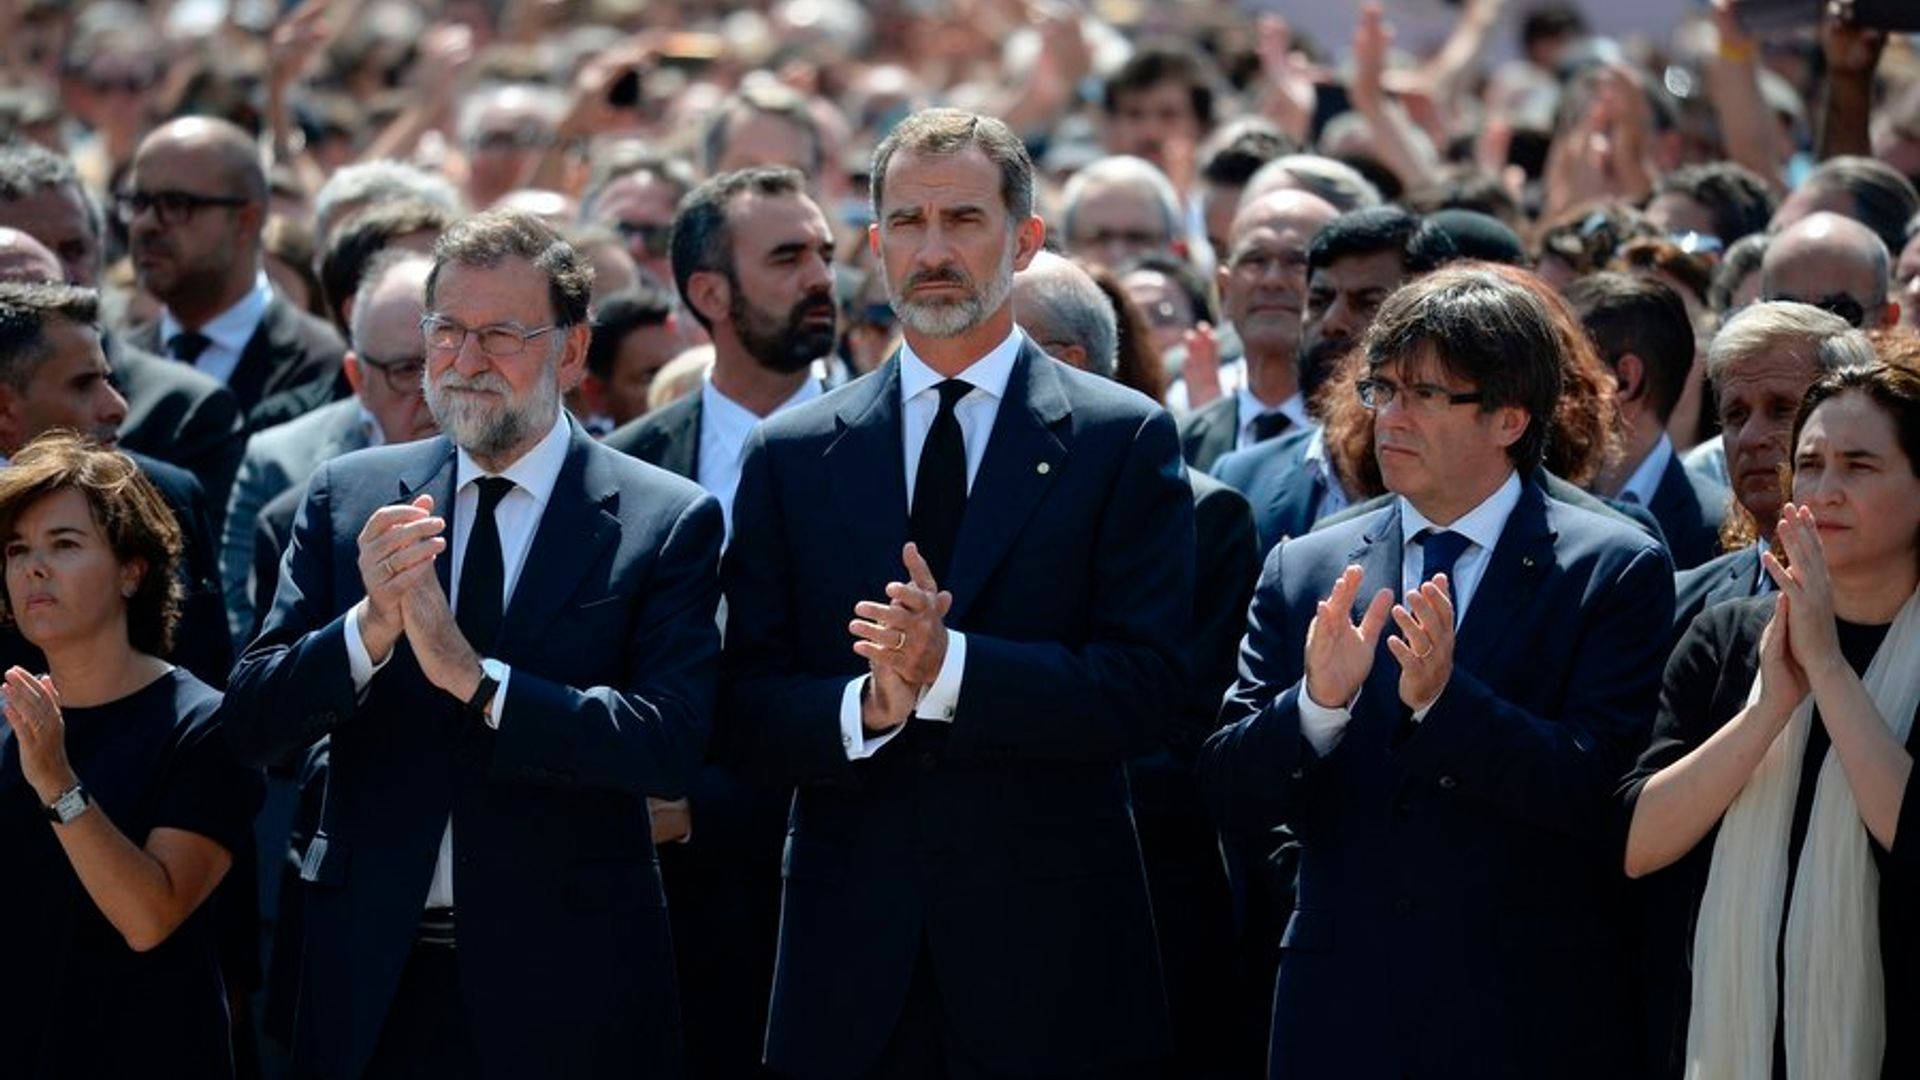 King Felipe of Spain leads minute of silence in central Barcelona after terror attack